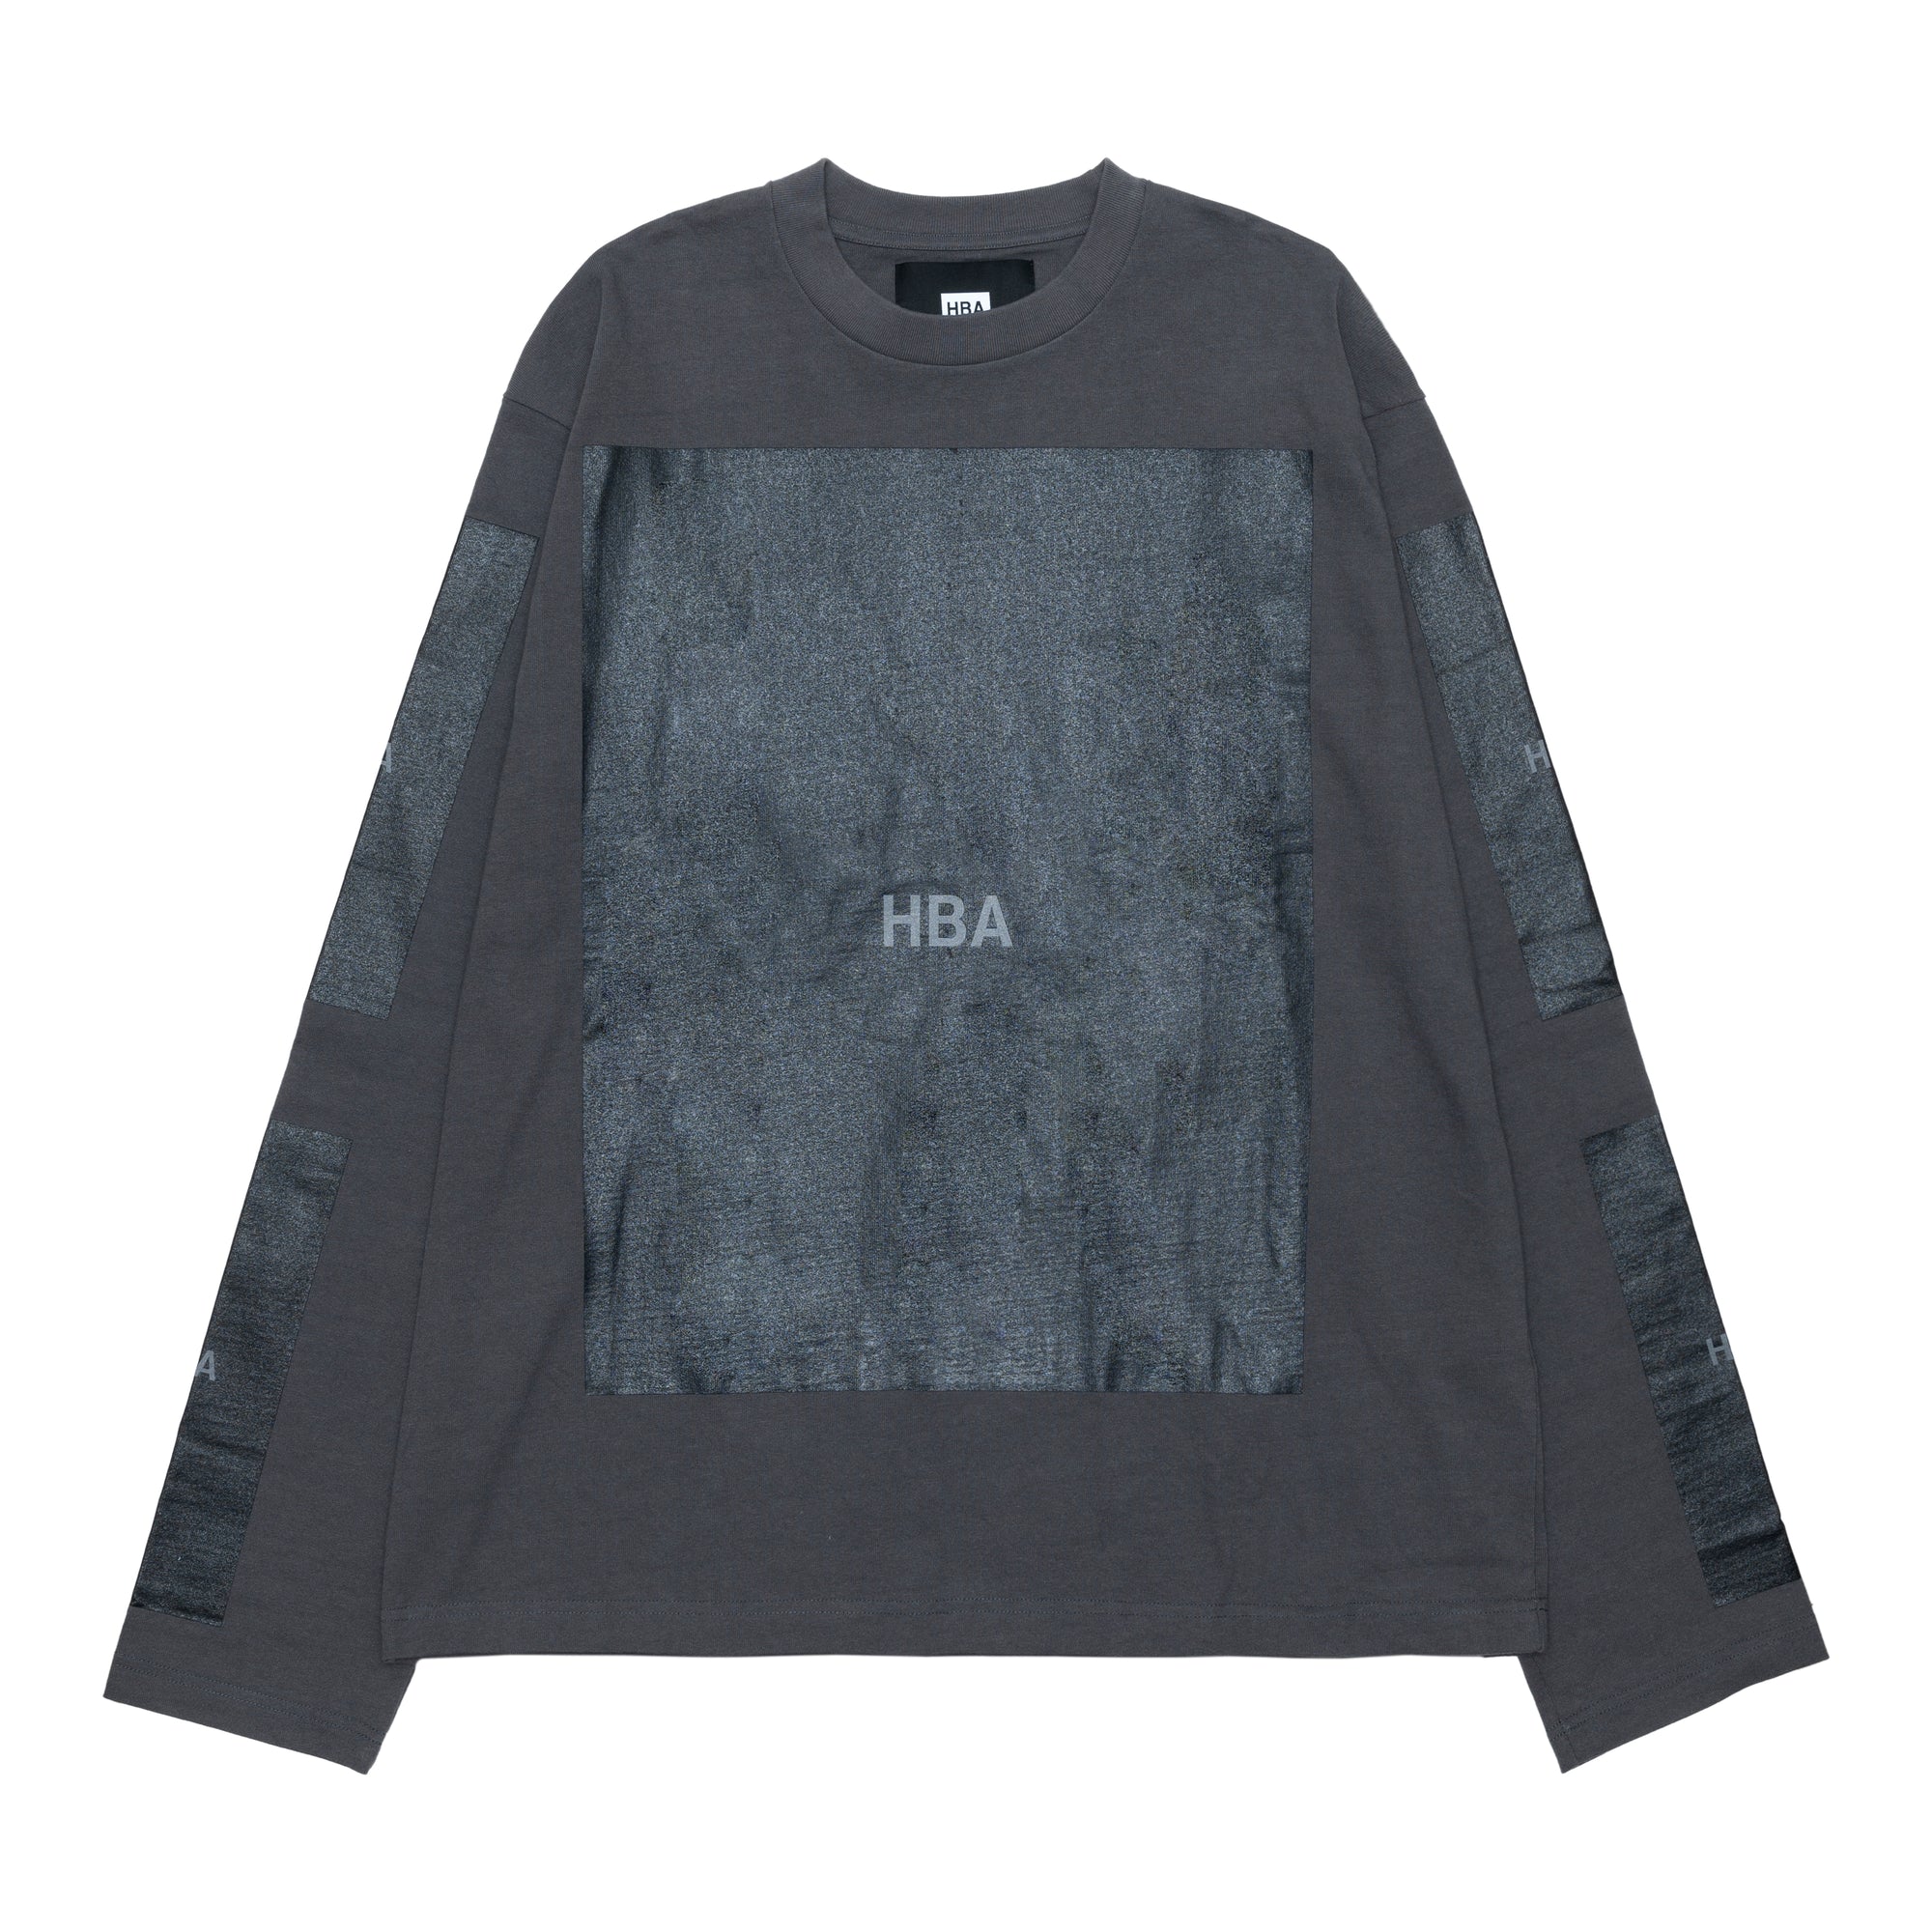 HOOD BY AIR - DSM SP BOX L/S TEE (WASHED/TRUE BLACK) view 1